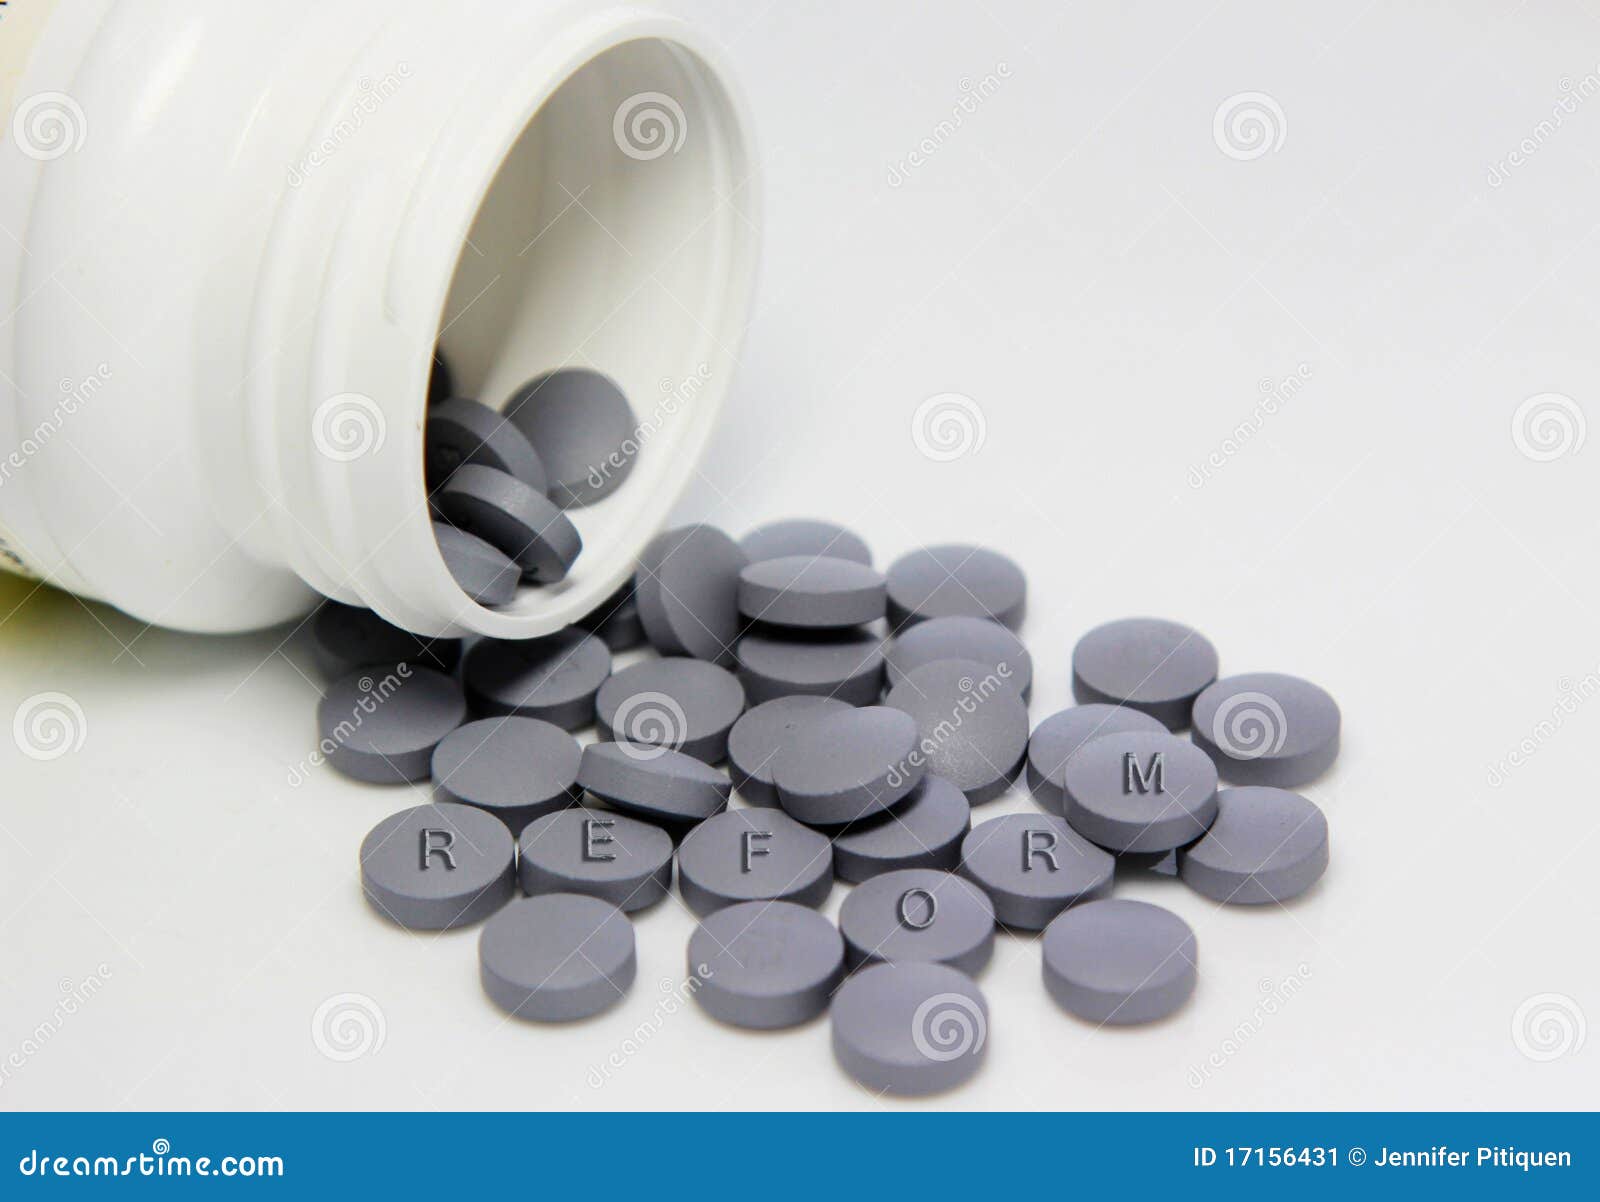 health care reform tablets